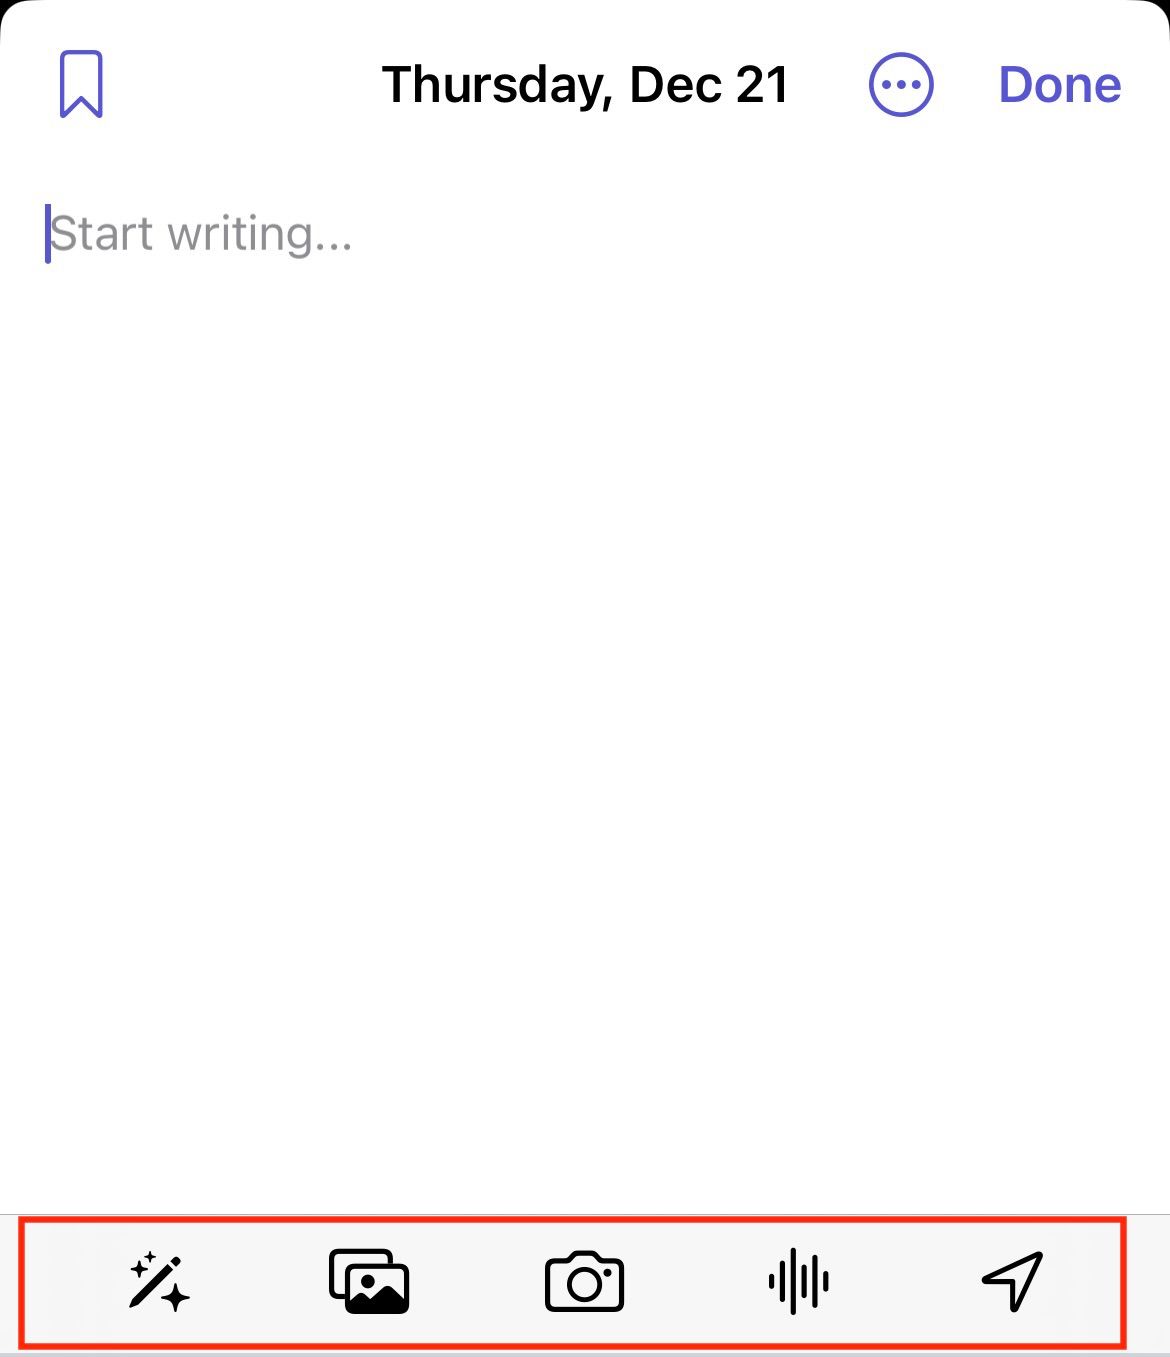 iPhone screen showing a blank screen to write a journal entry.